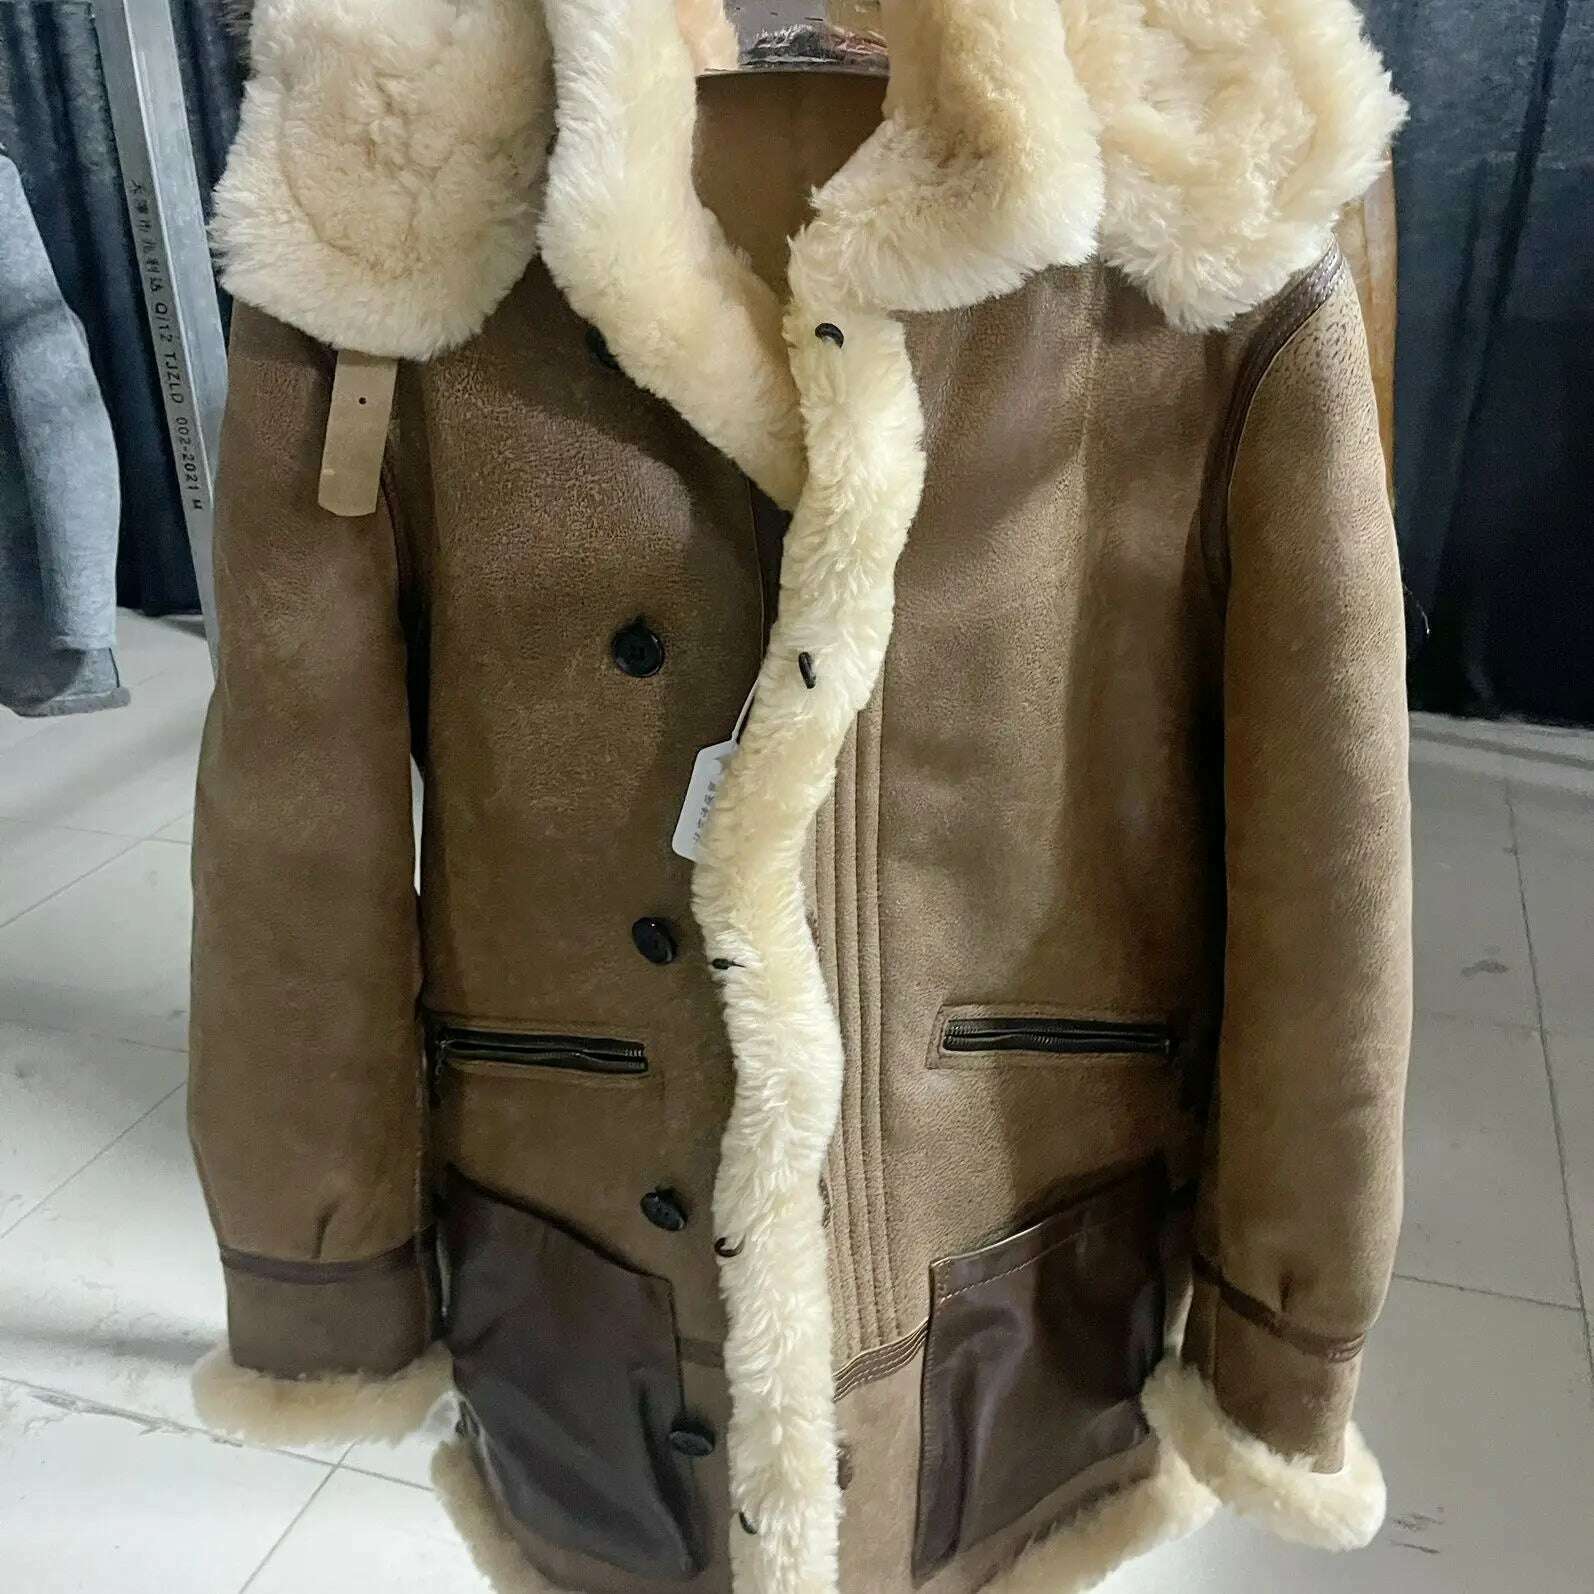 KIMLUD, Winter Men Original Fur Coat Mid-length Thickened Sheepskin Leather Coat Bomber Hooded Wool Lining Warm Snow Men's Clothing, brown / S, KIMLUD Womens Clothes